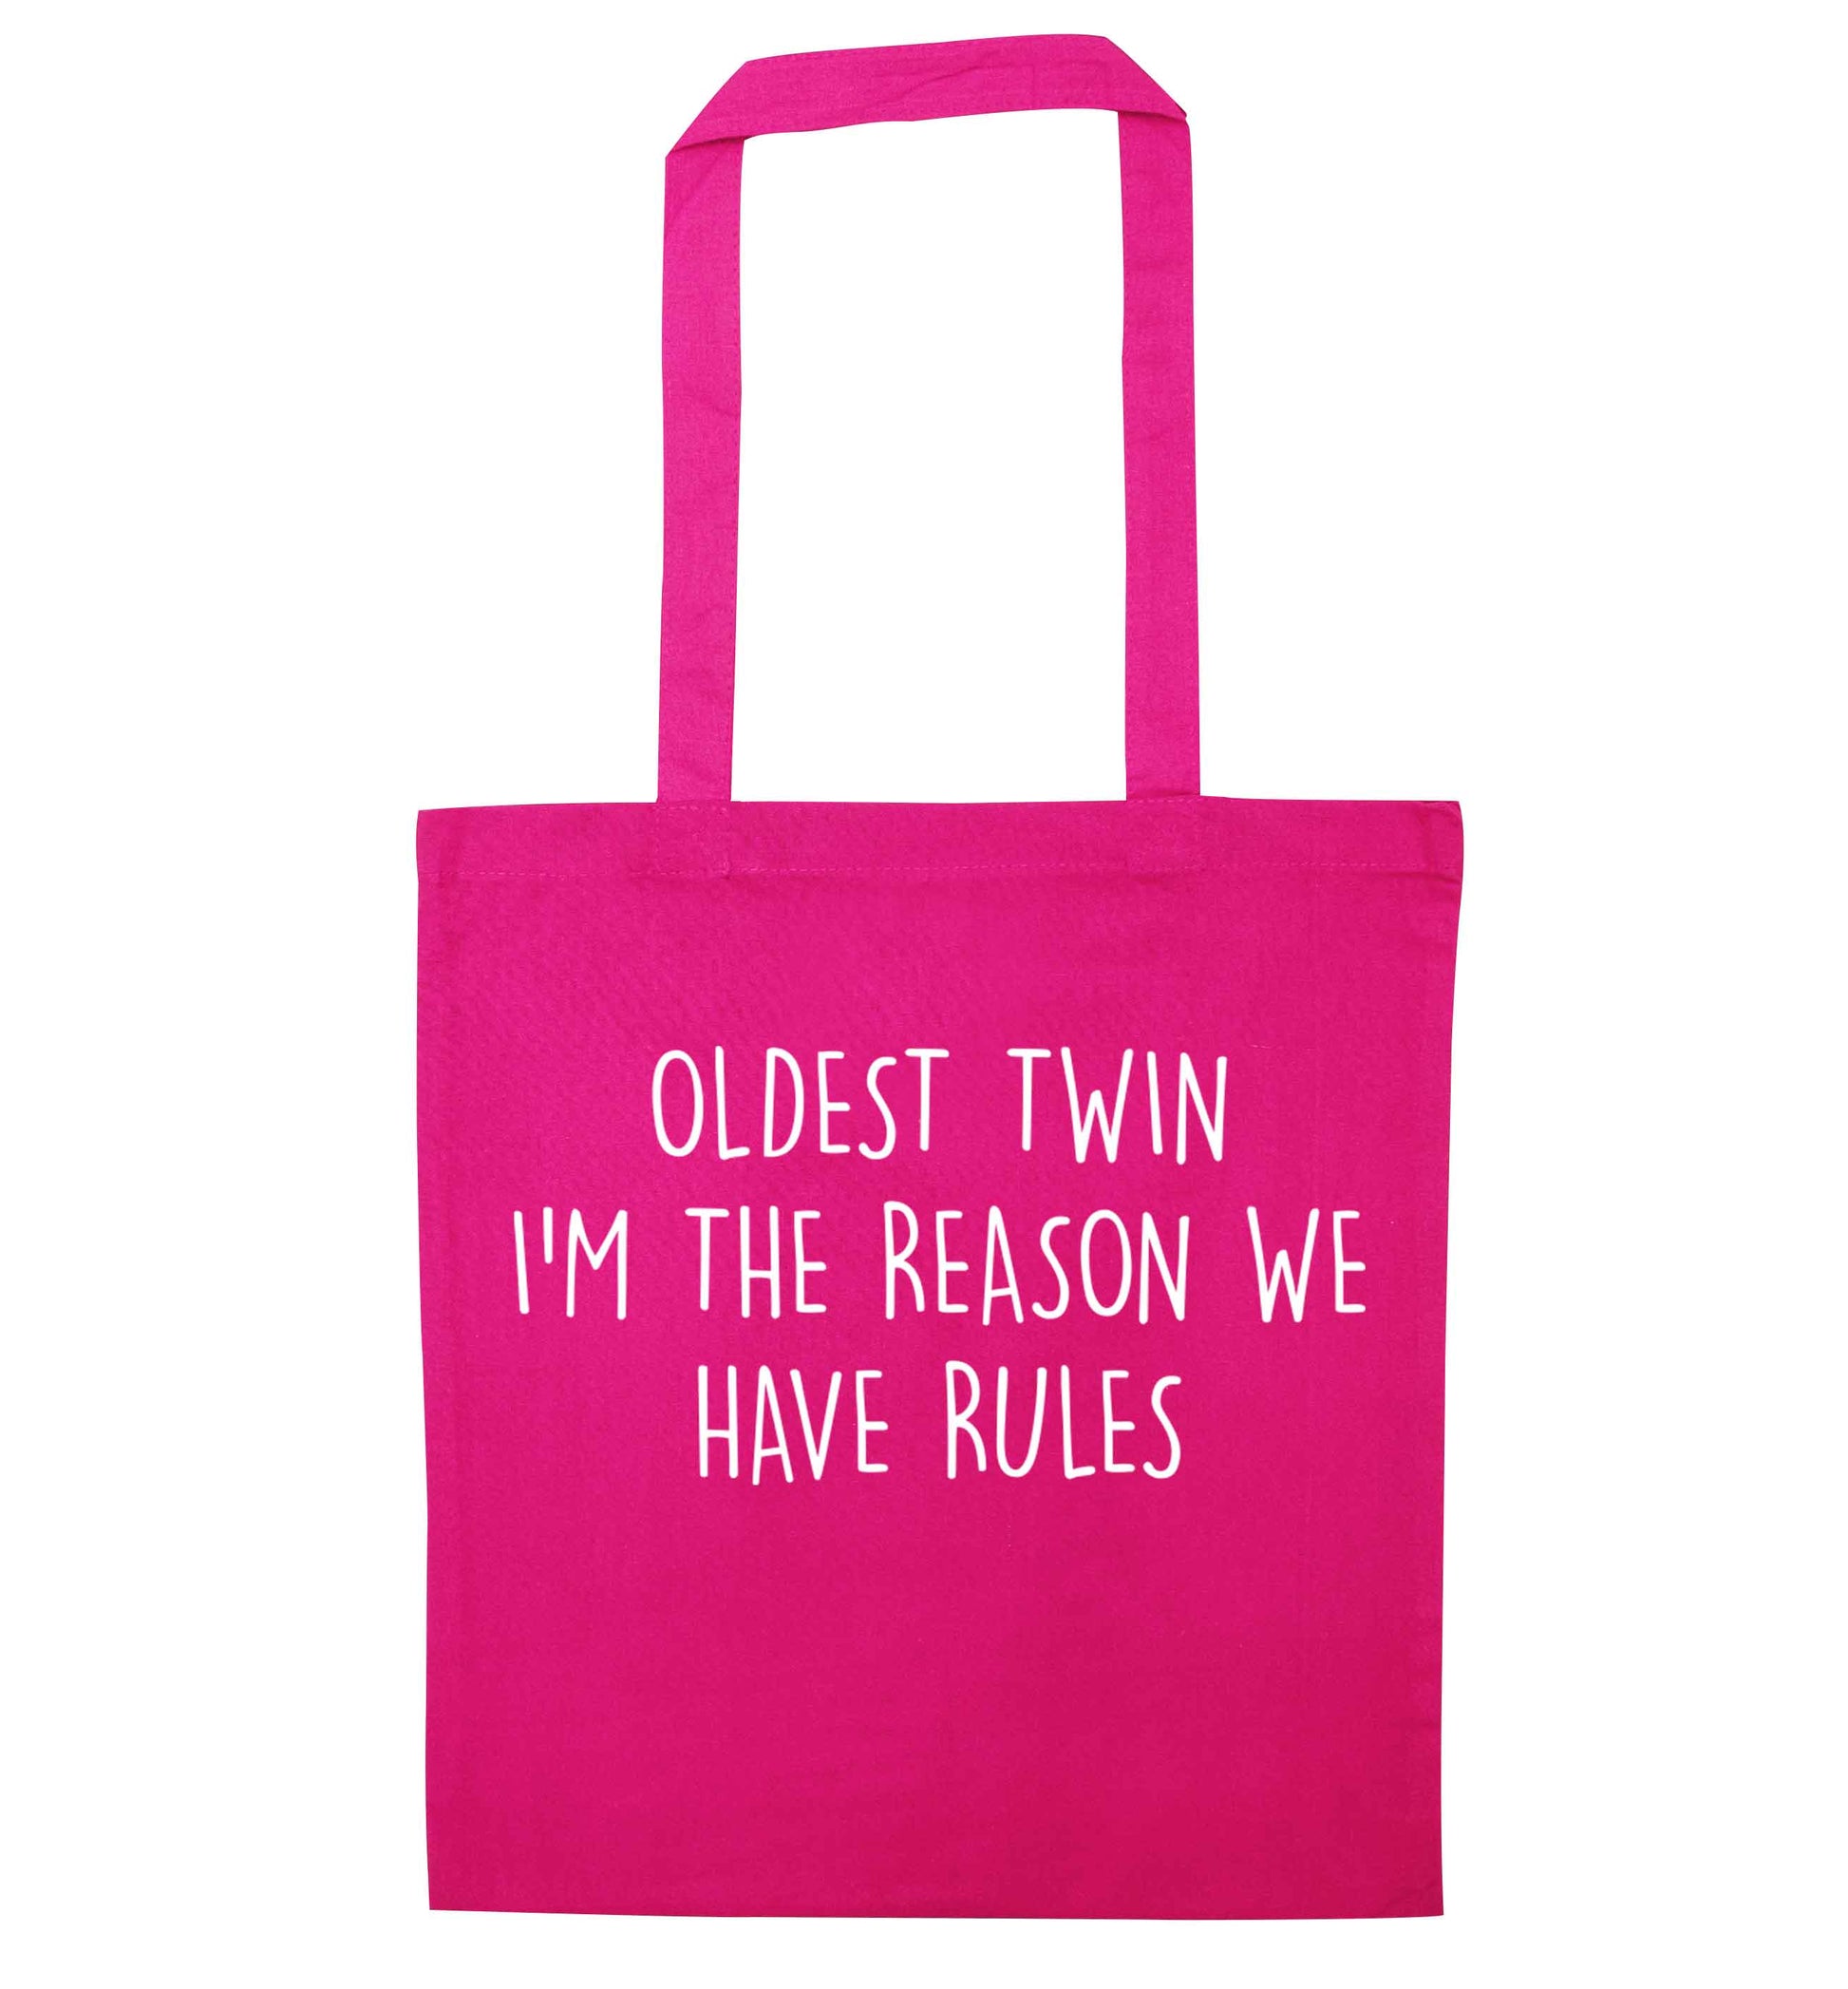 Oldest twin I'm the reason we have rules pink tote bag